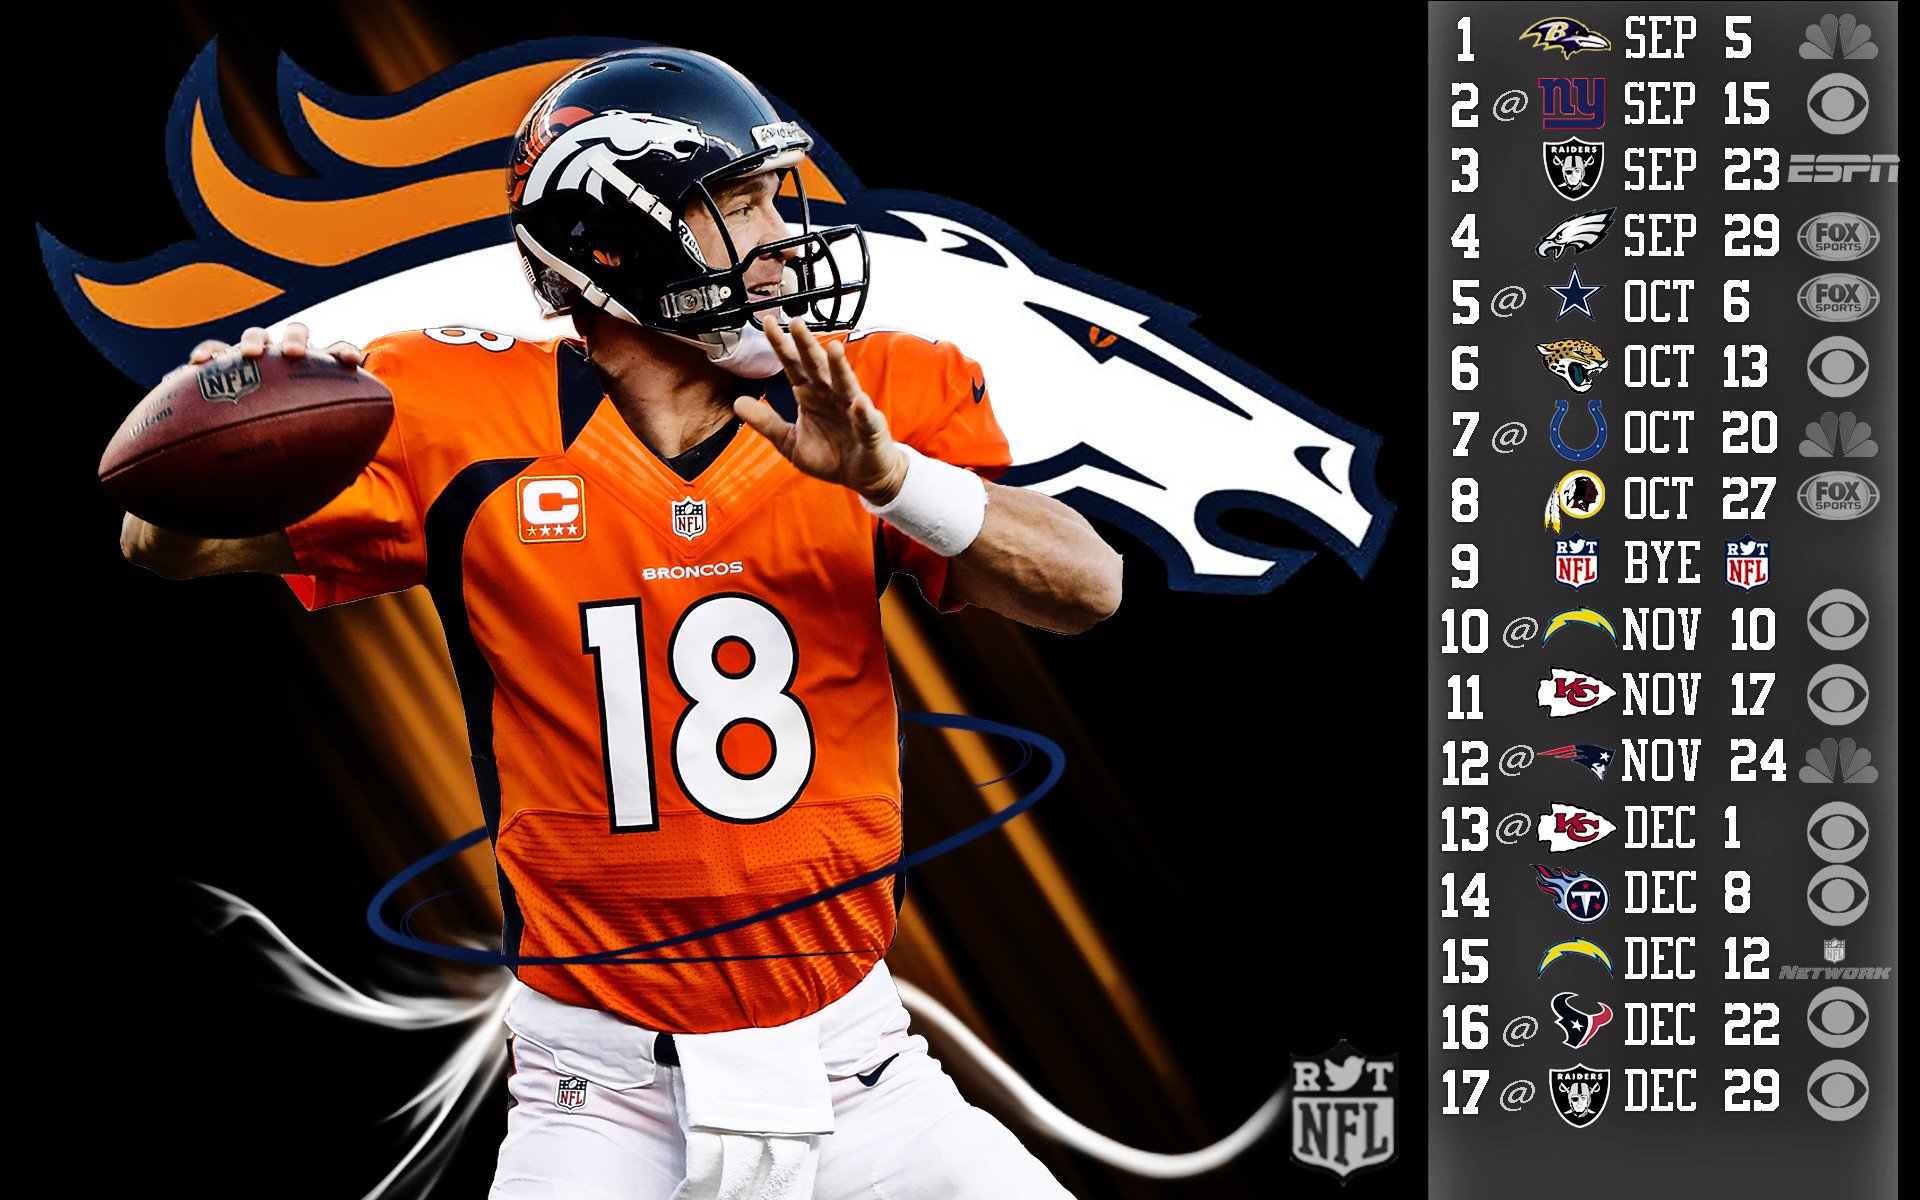 1920x1200 Search Results for “denver broncos wallpaper schedule – Adorable Wallpapers